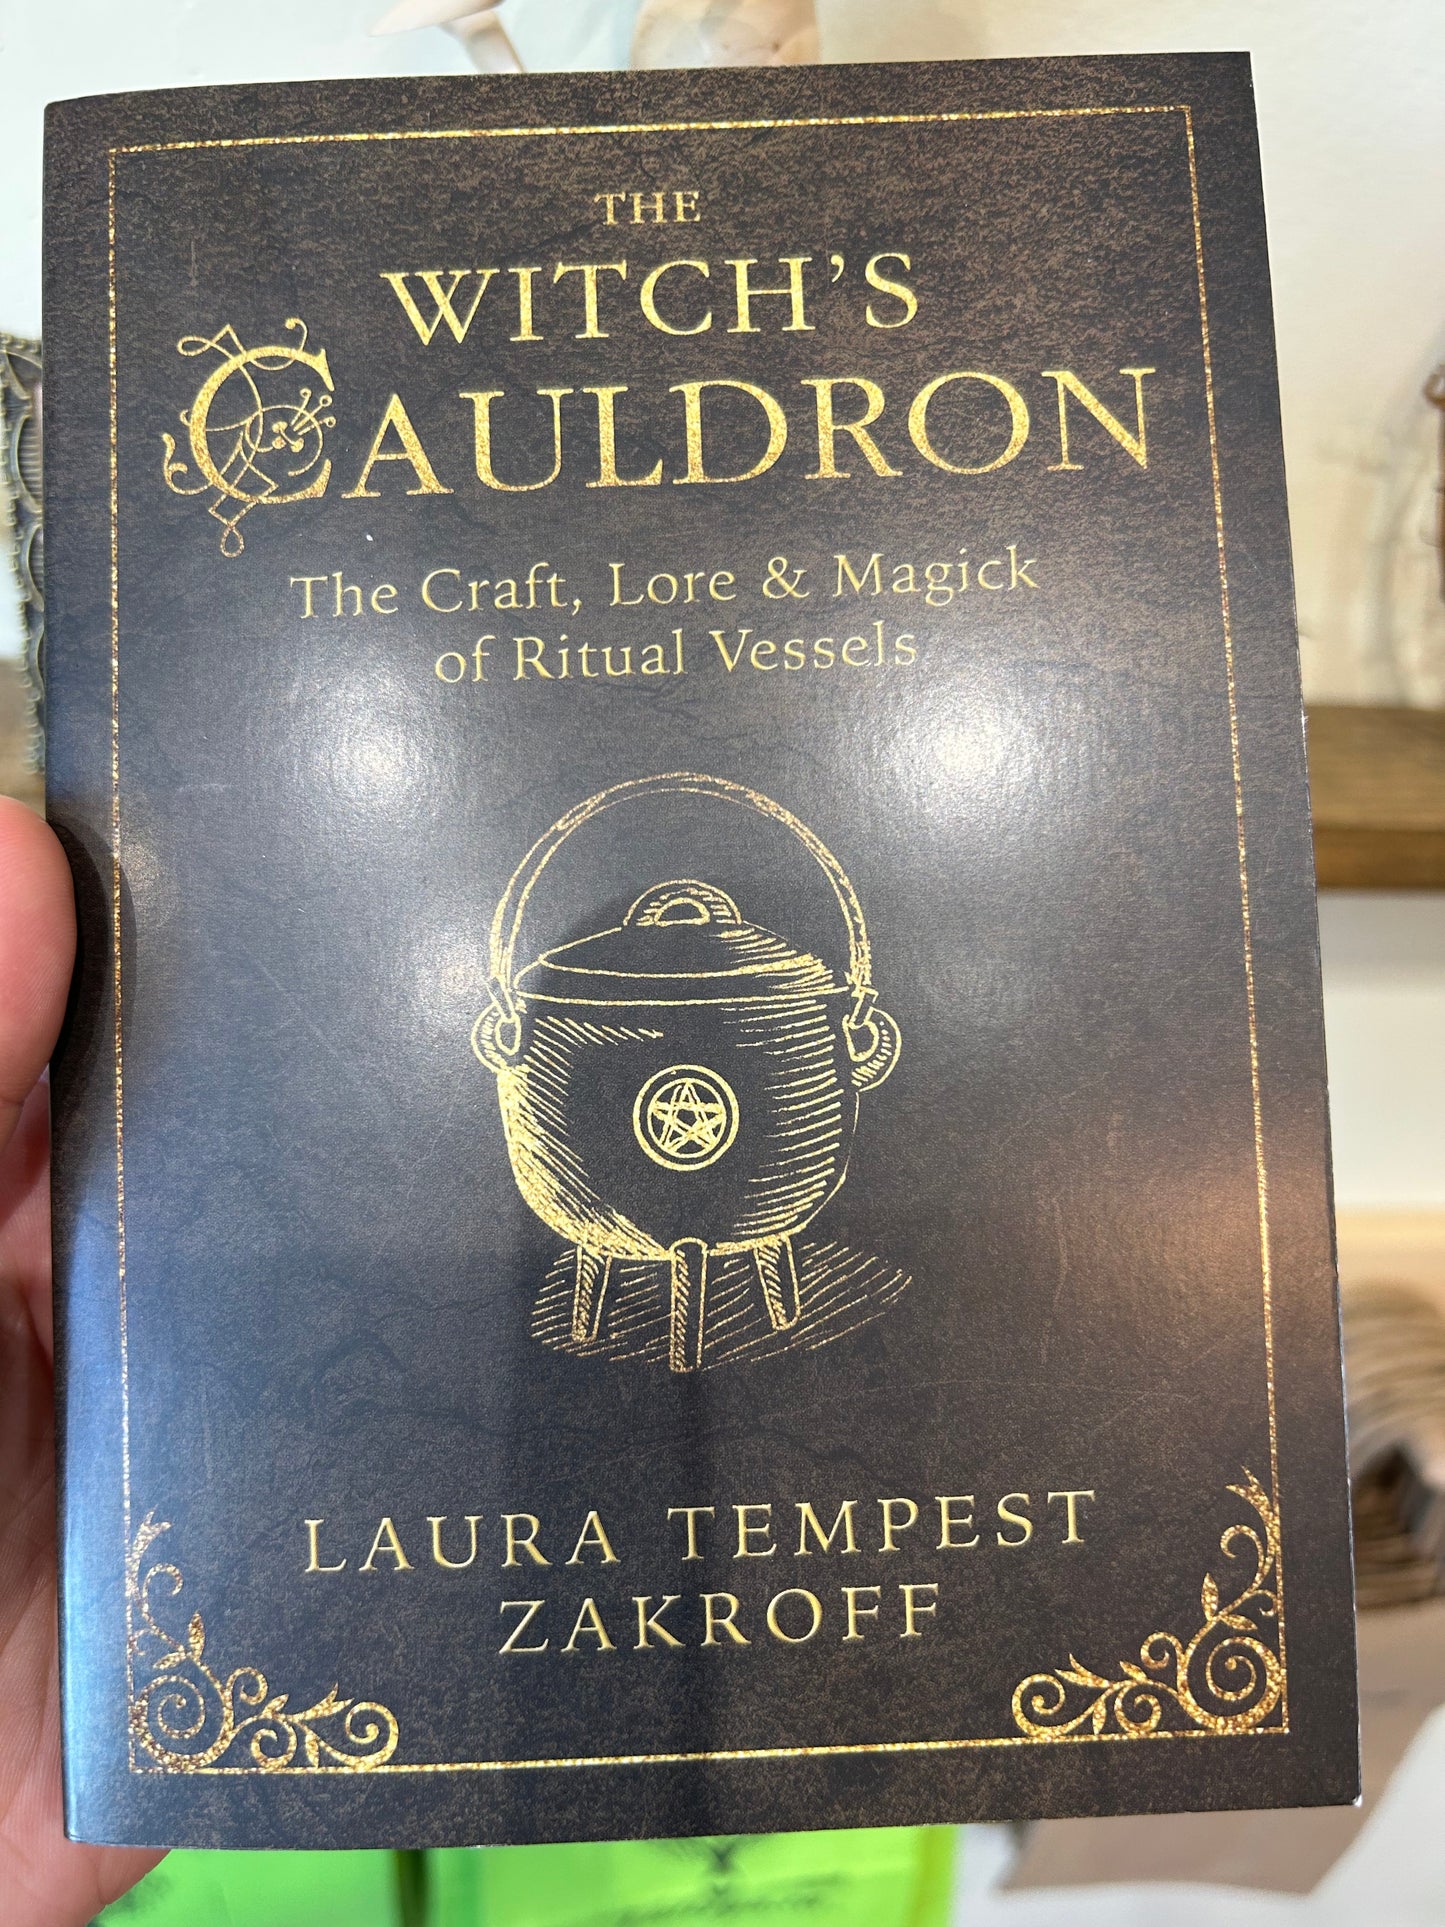 the witch's cauldron by Laura Tempest Zakroff